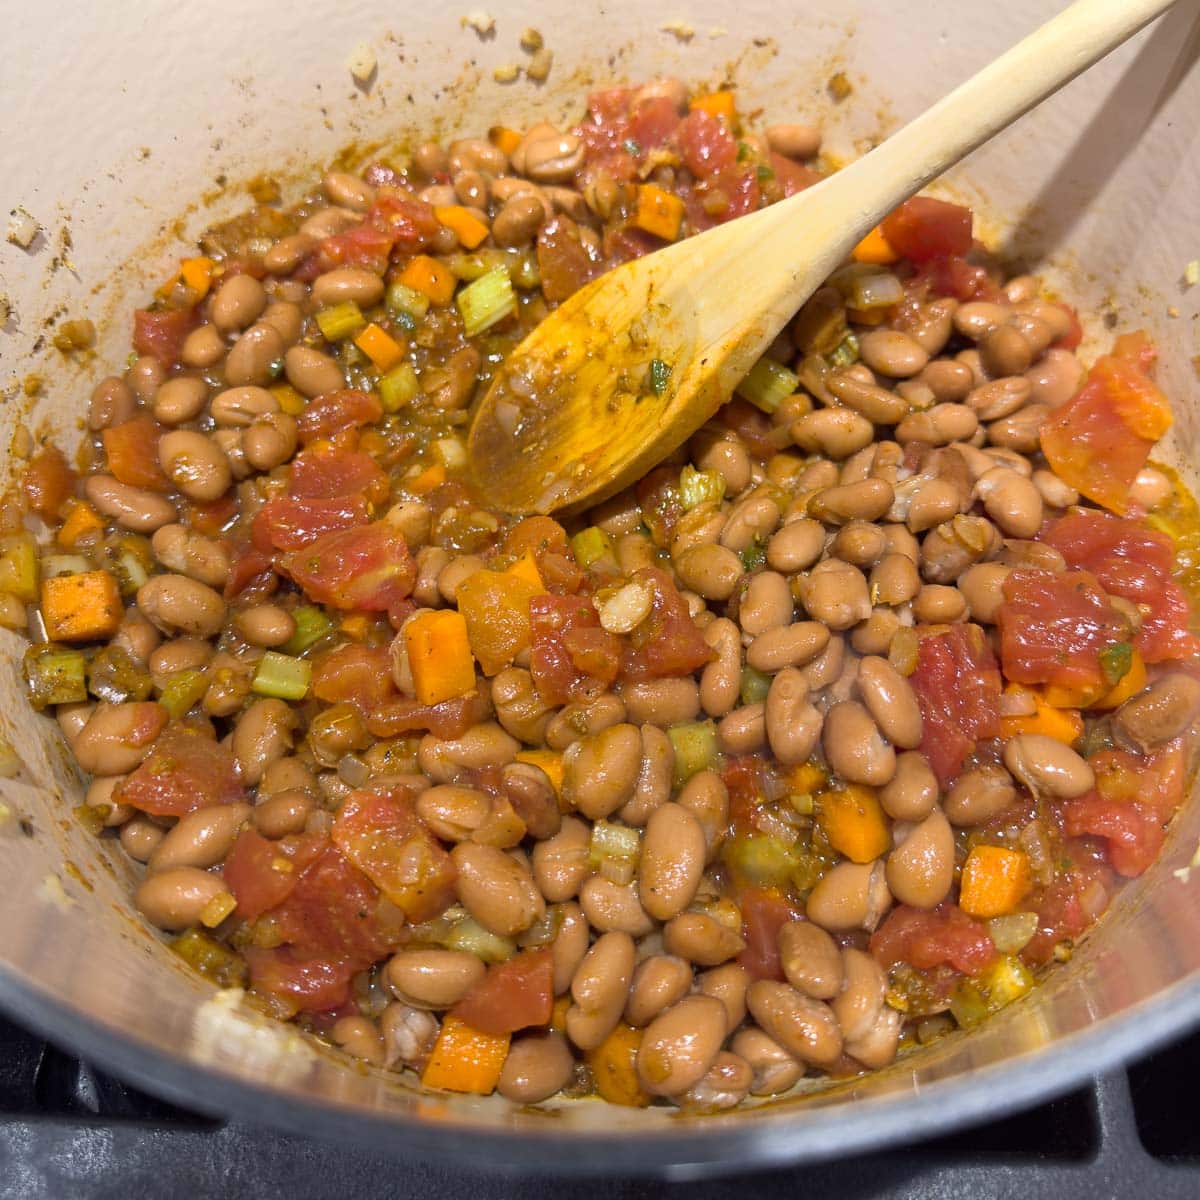 Now adding the beans and diced tomatoes to the vegetables, herbs and spices. 